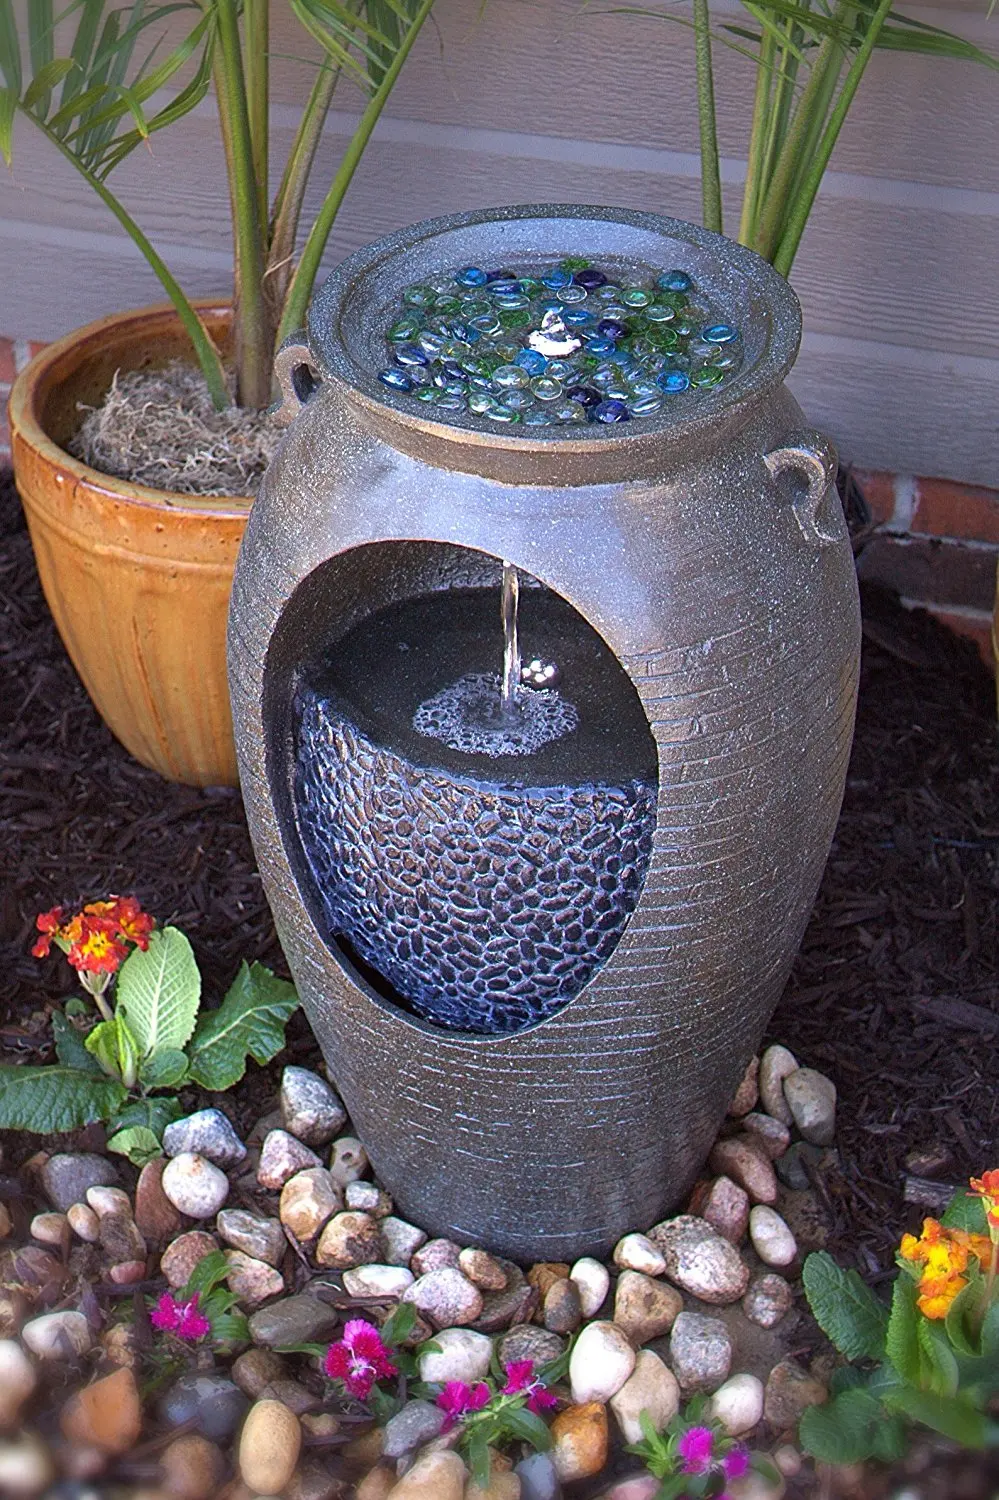 Buy Lighted Fountain with Artful Textured Patterns in Natural Slate in Cheap Price on